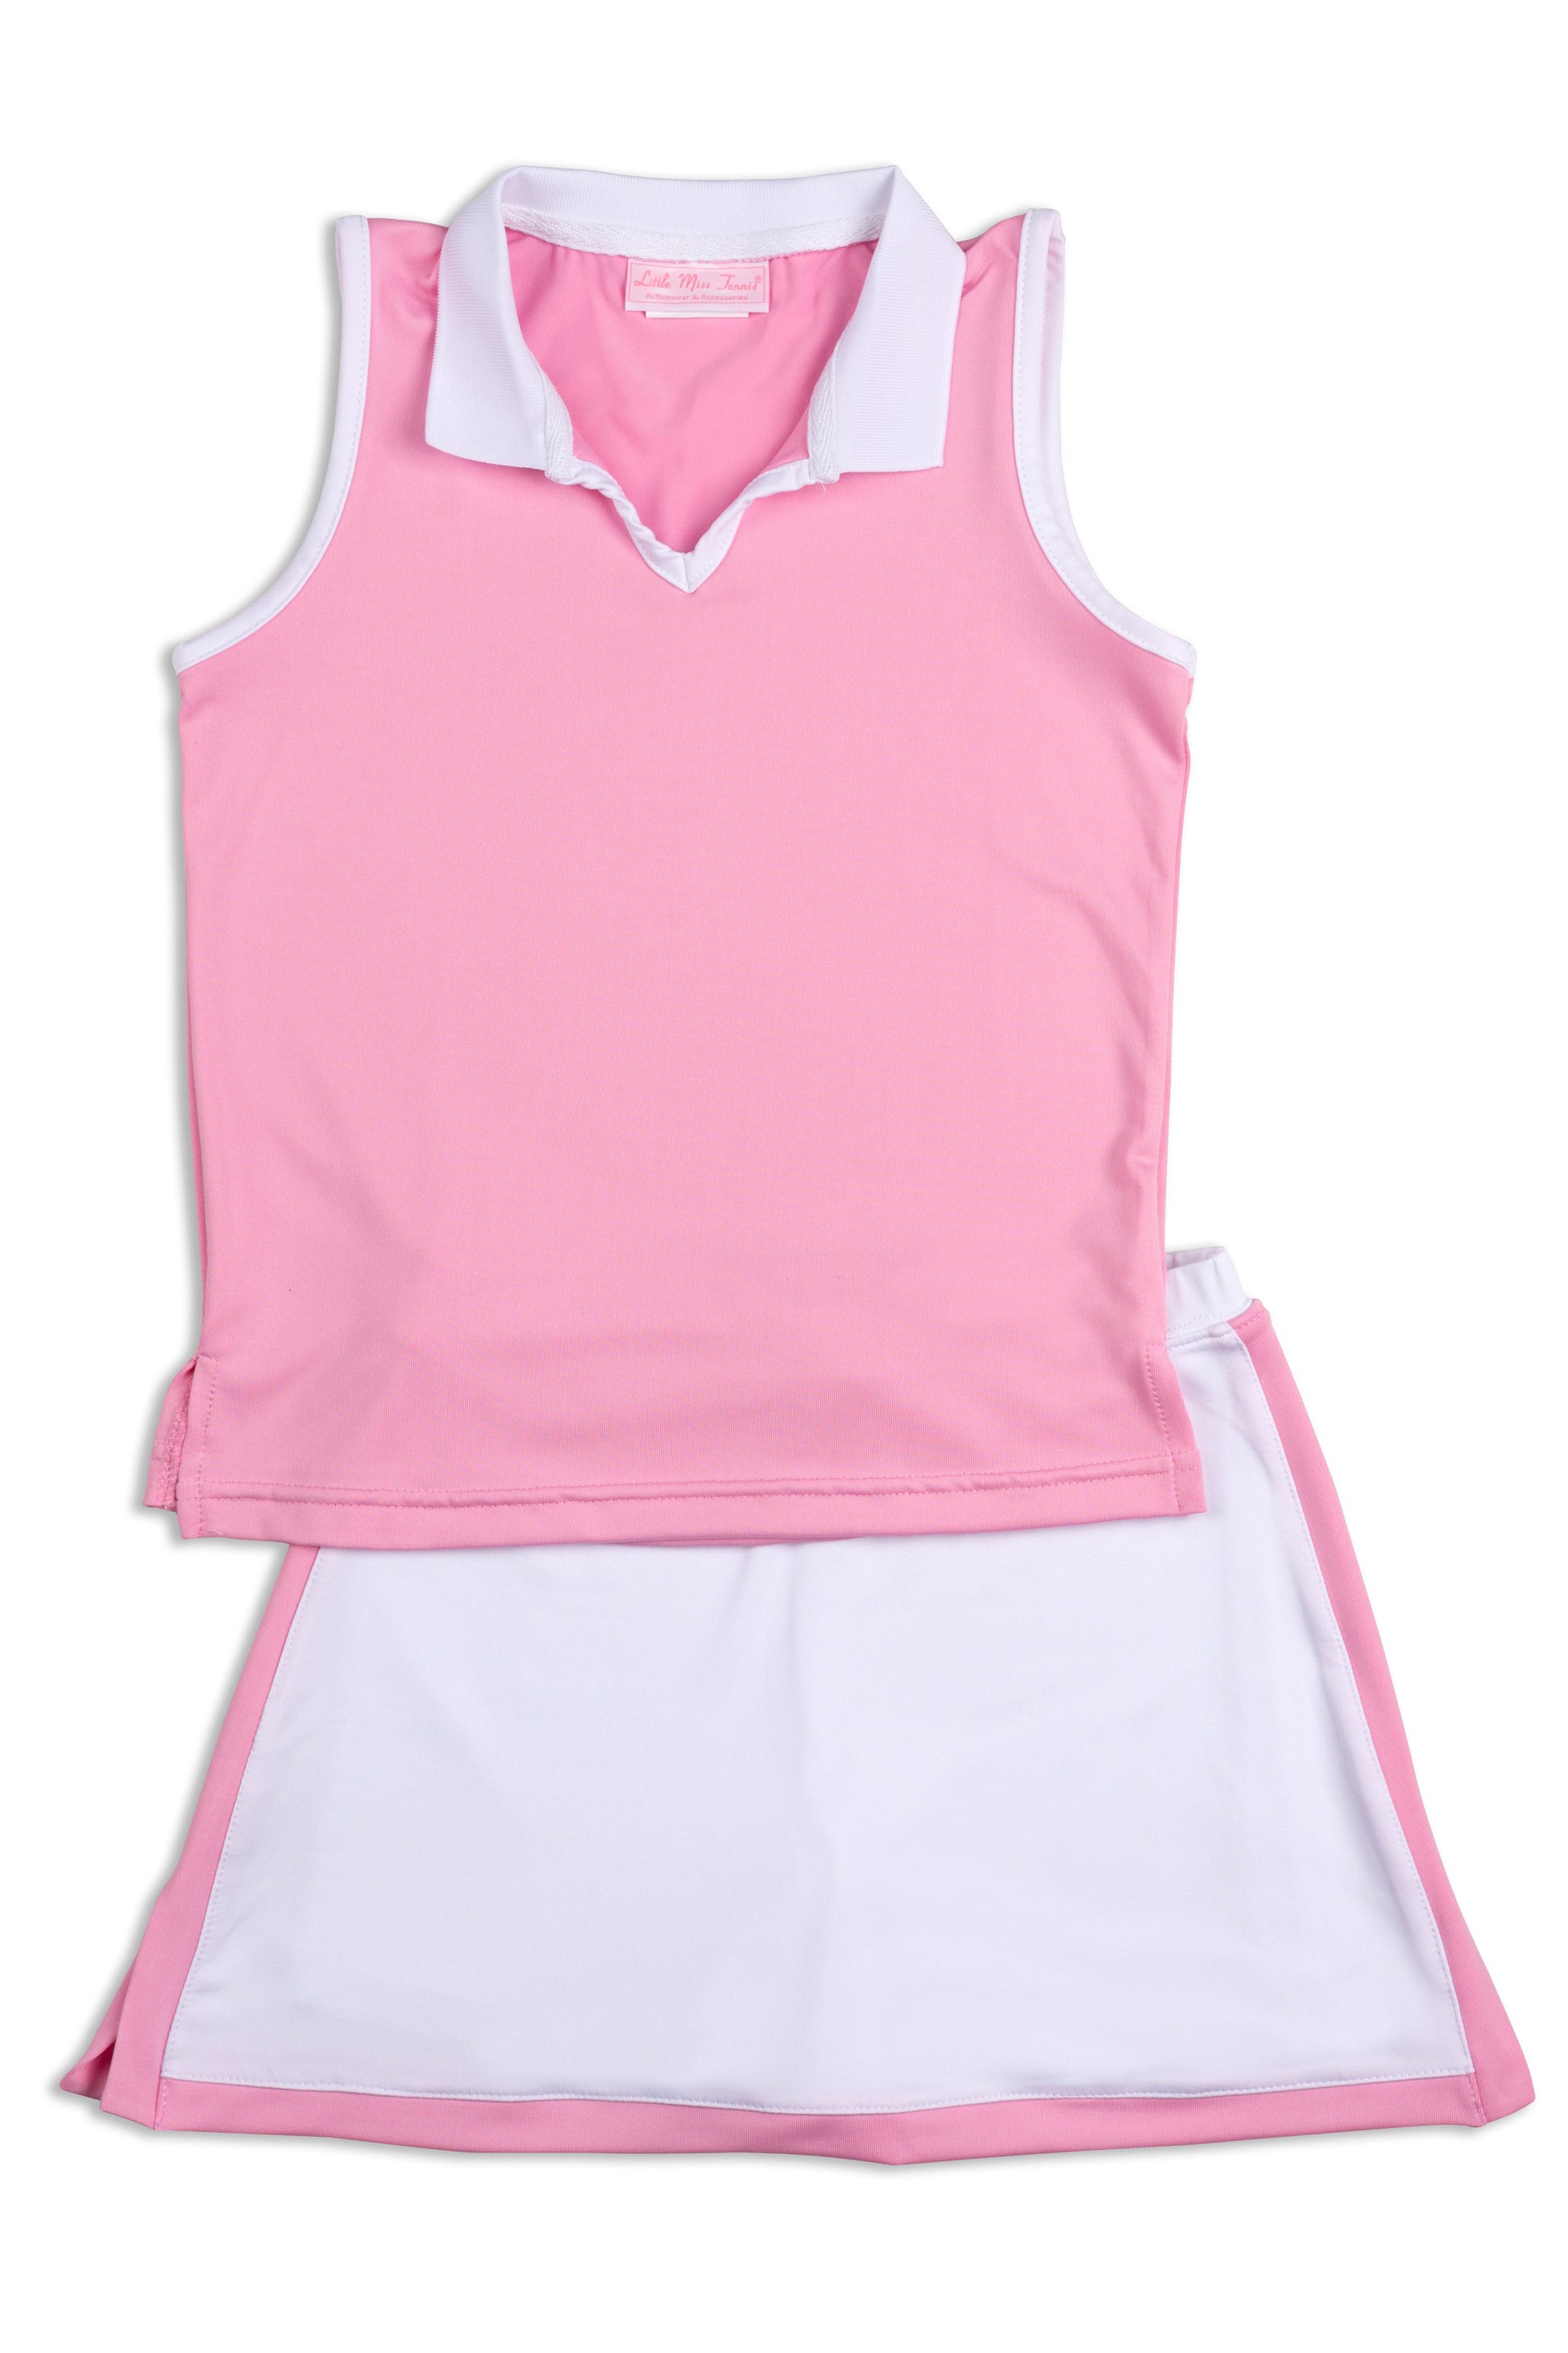 Everyday Club Top Pink - Little Miss Tennis